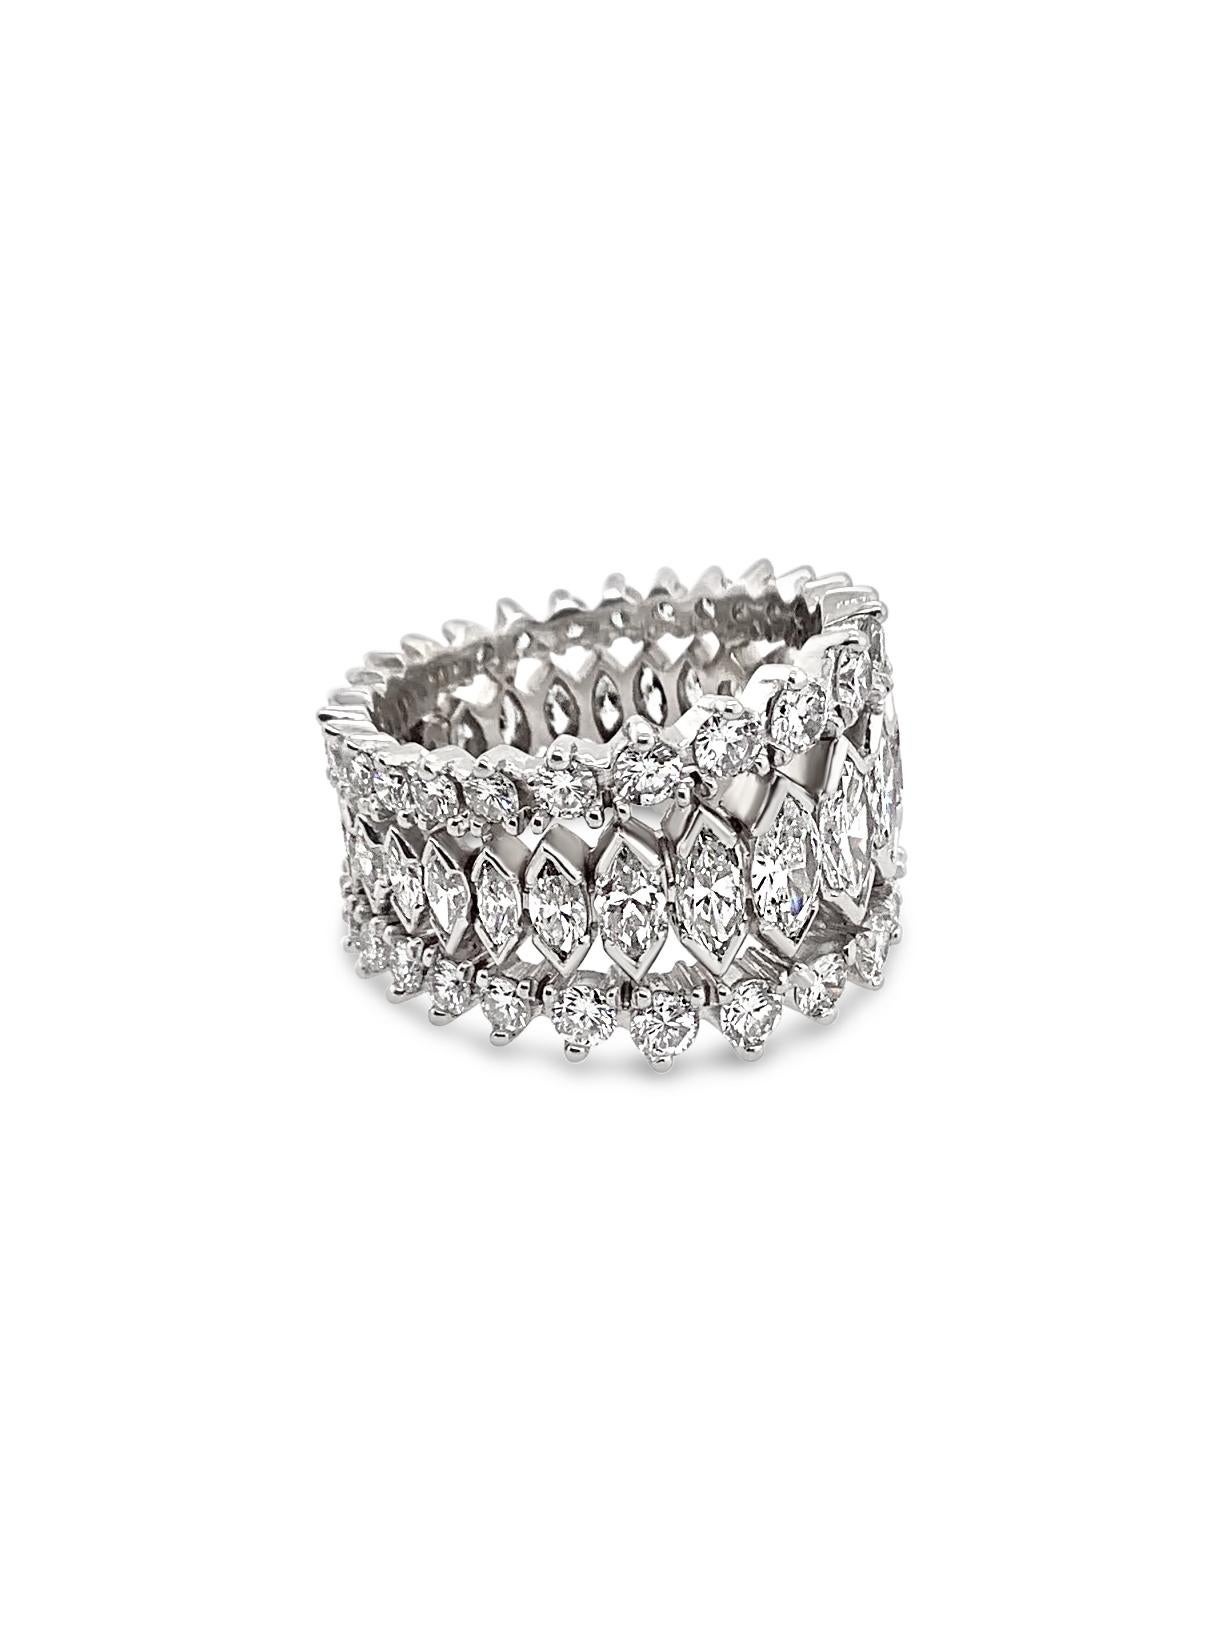 4.60 carat total weight marquise & round brilliant diamond platinum eternity band.  Diamond clarity VS1 - 2 and color G-H. Tapers from 15mm wide to 10mm - Finger Size 7.5 
